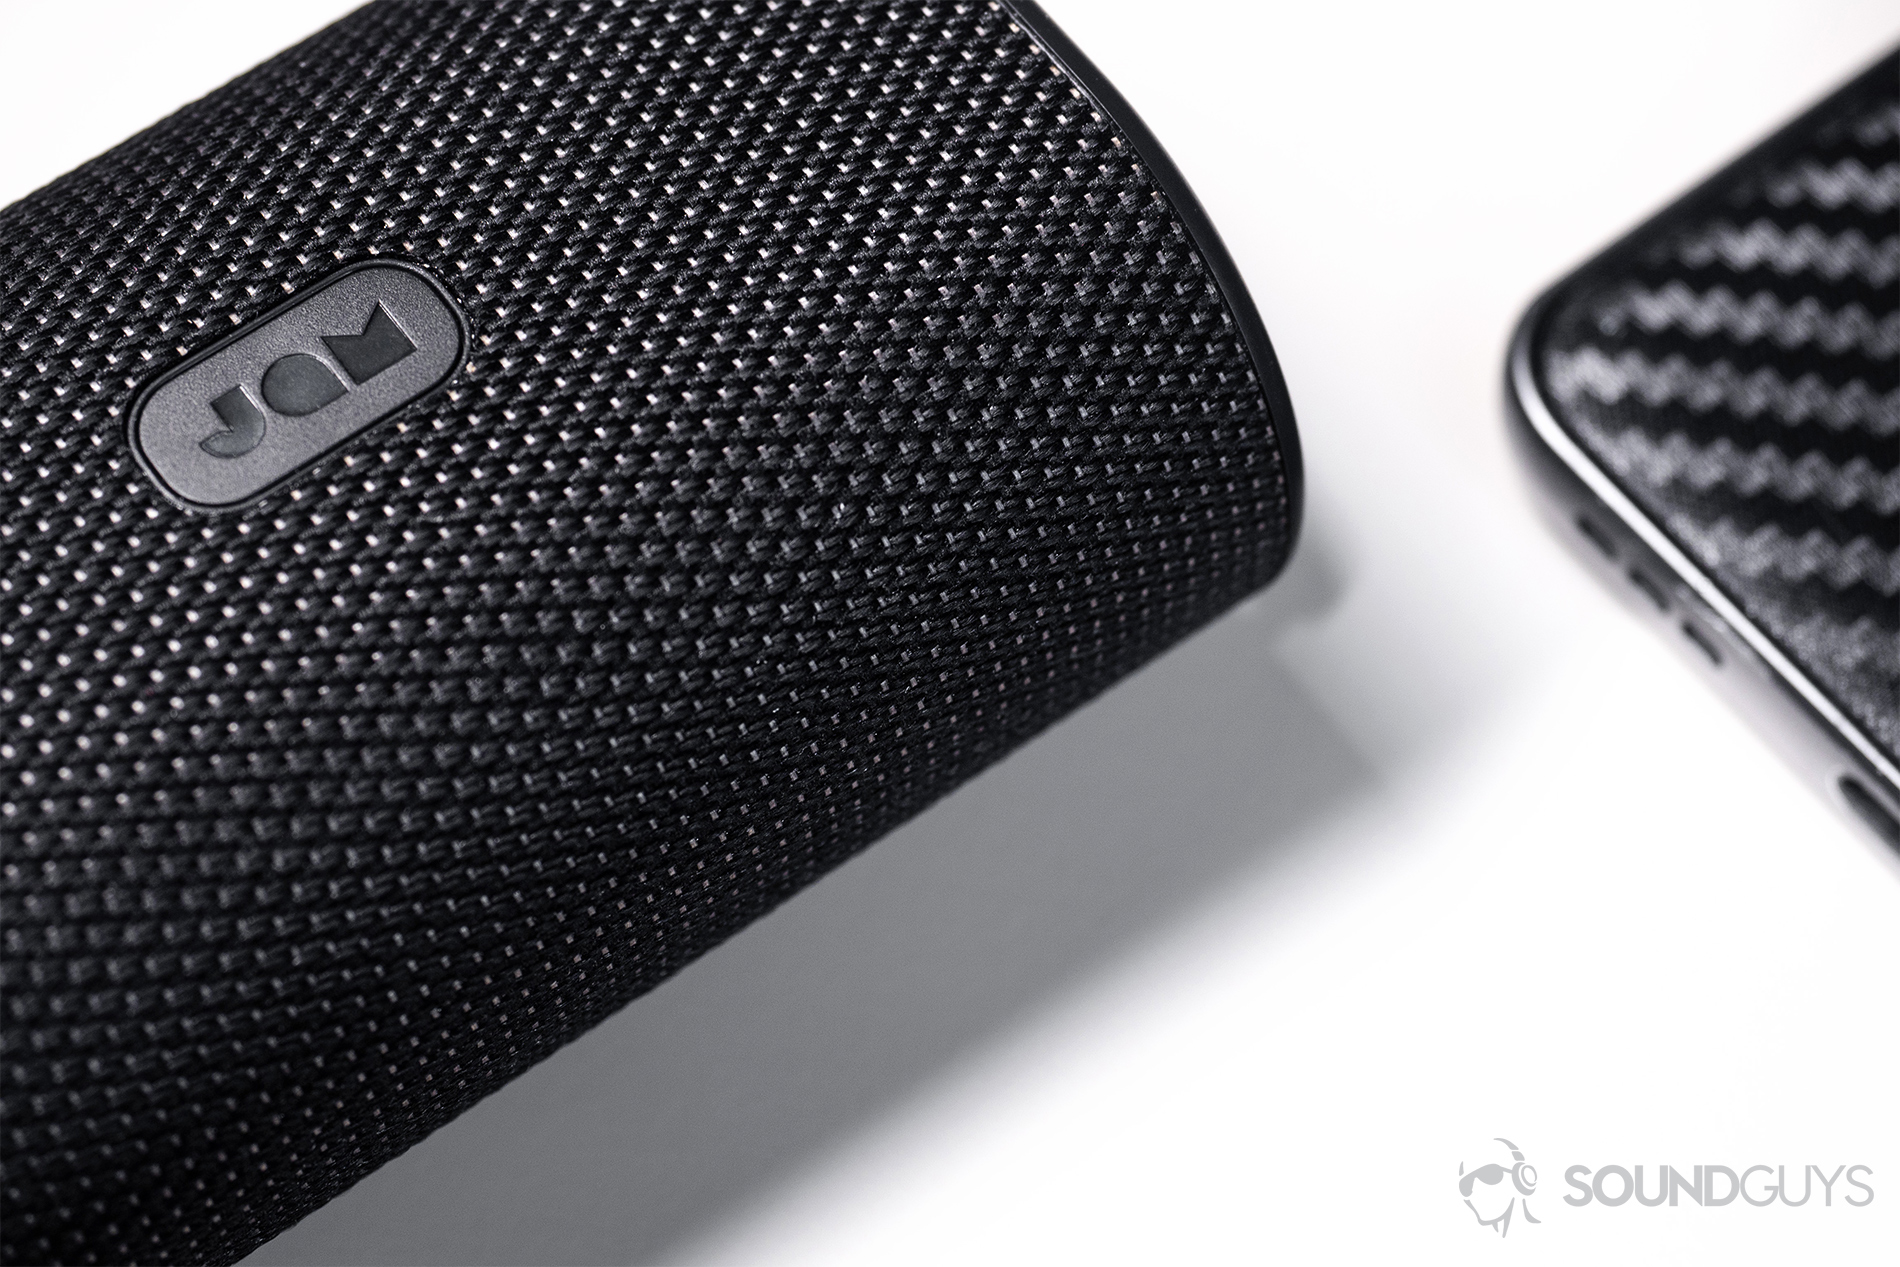 Jam Live True: A close-up of the clothe-wrapped charging case.